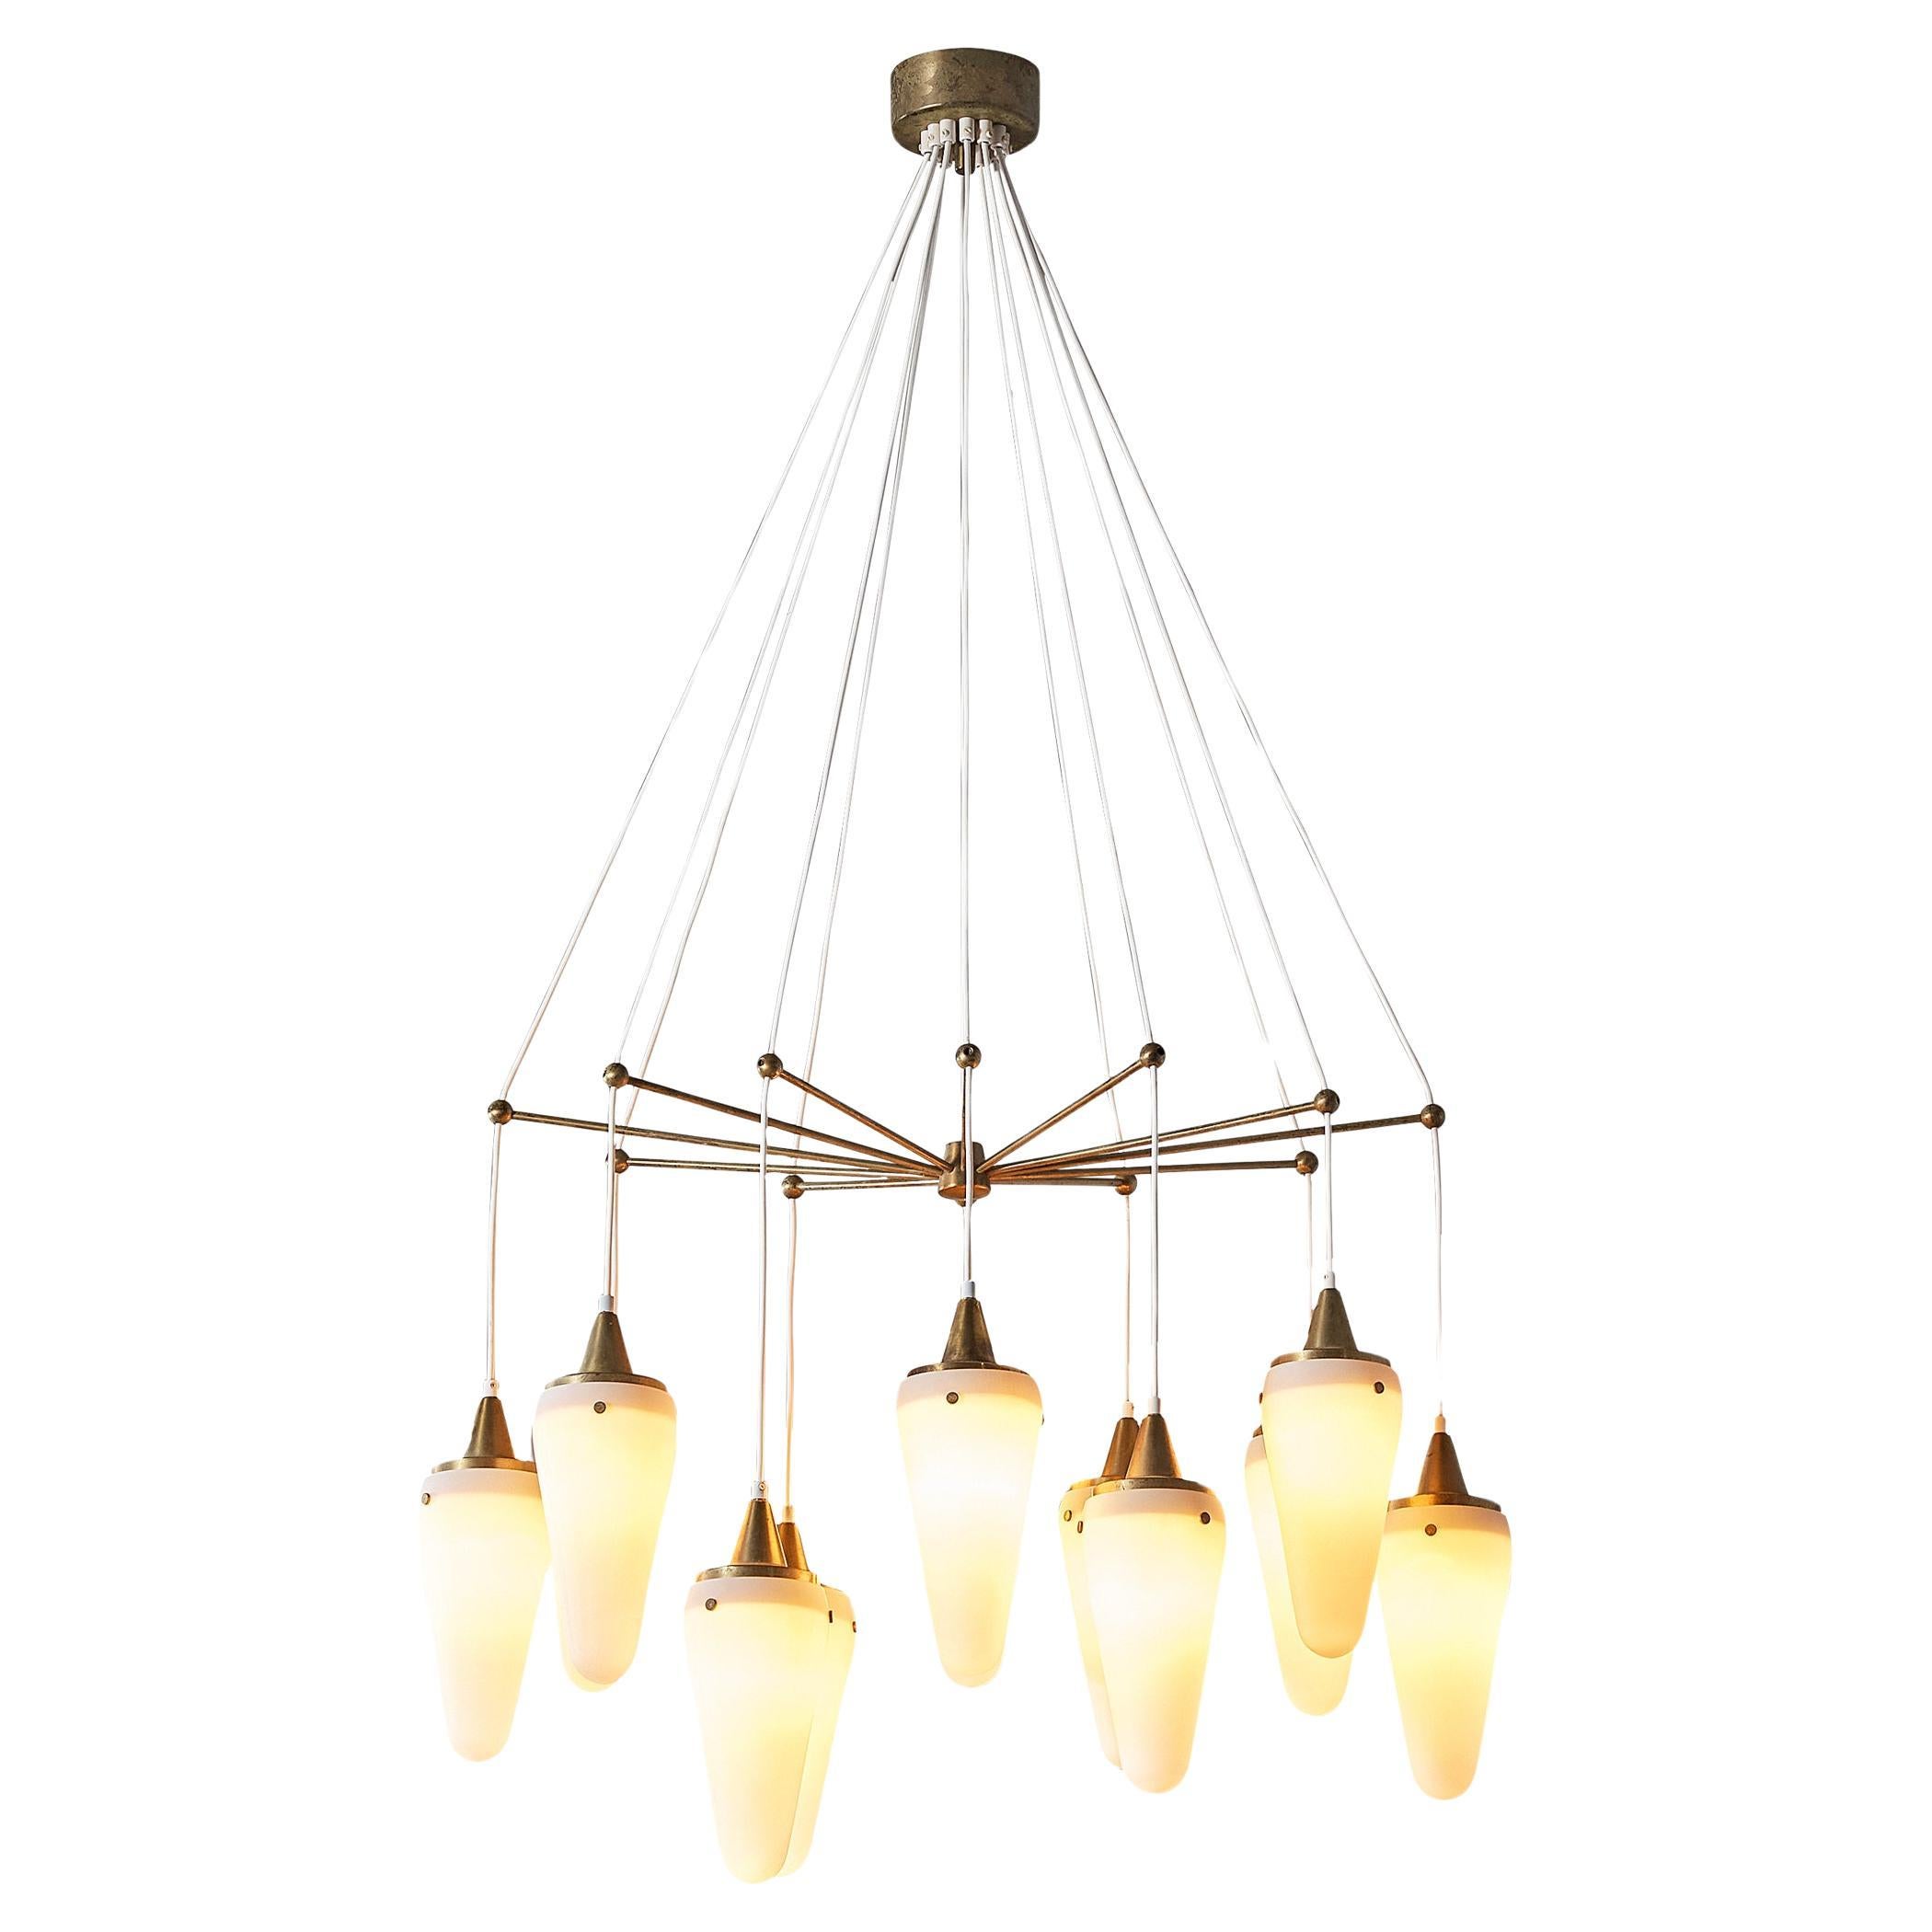 Hans-Agne Jakobsson Chandelier in Brass and White Opaque Glass 